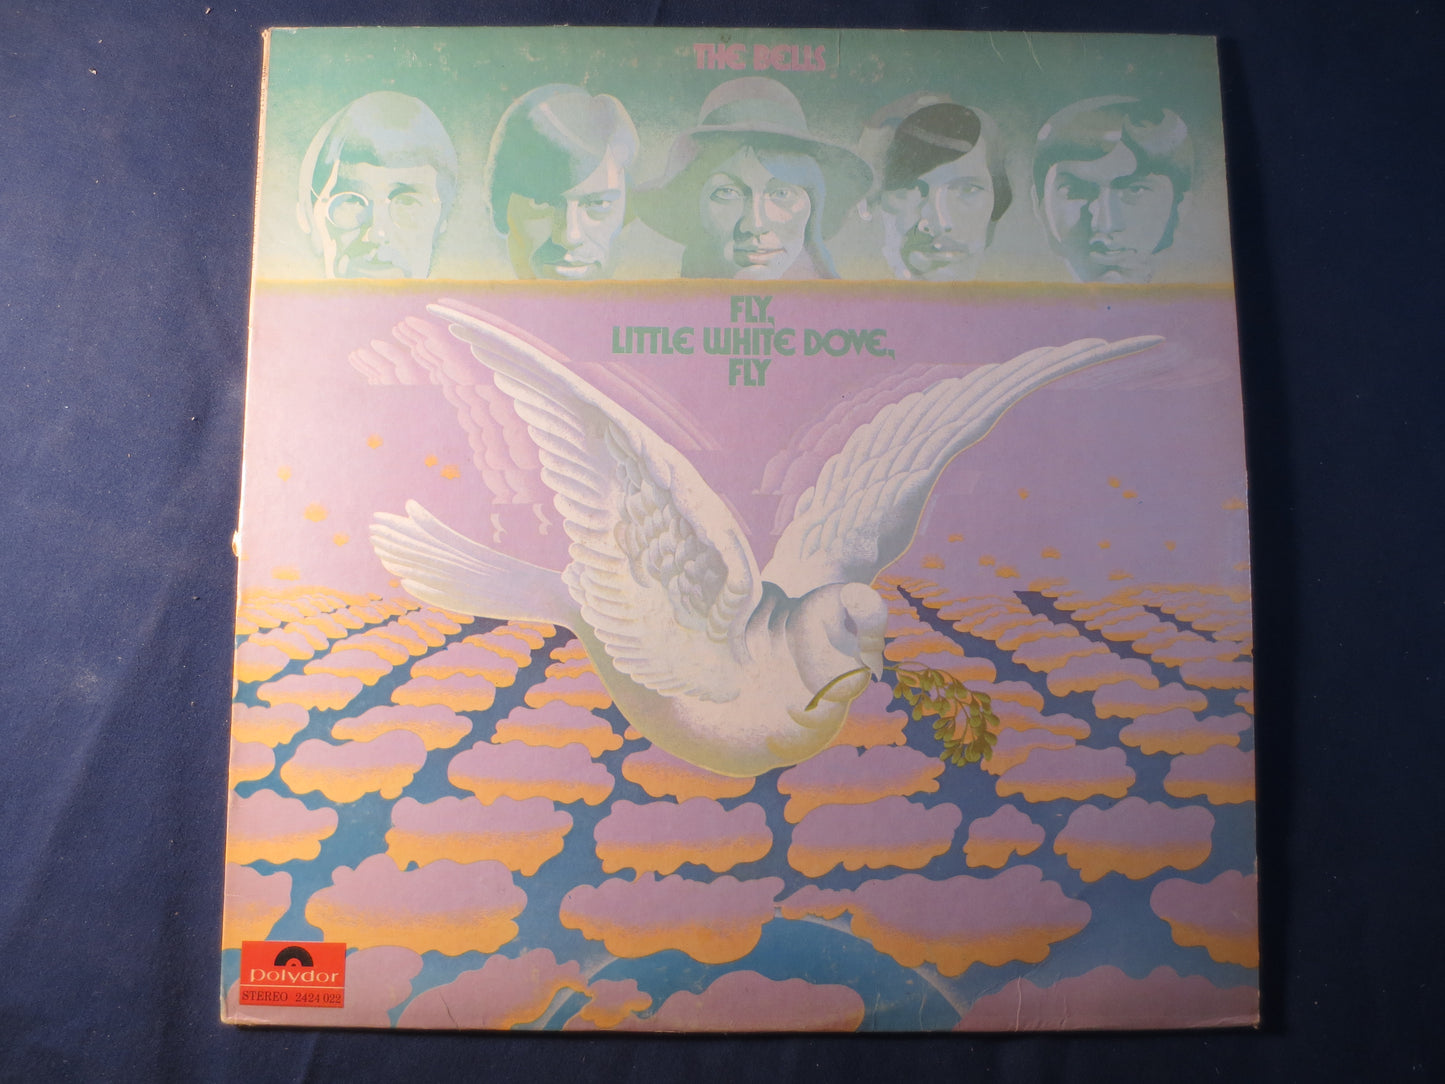 The BELLS, Fly Little WHITE DOVE Fly, The Bells Records, The Bells Album, The Bells Lp, Vinyl Records, Lps, 1971 Records